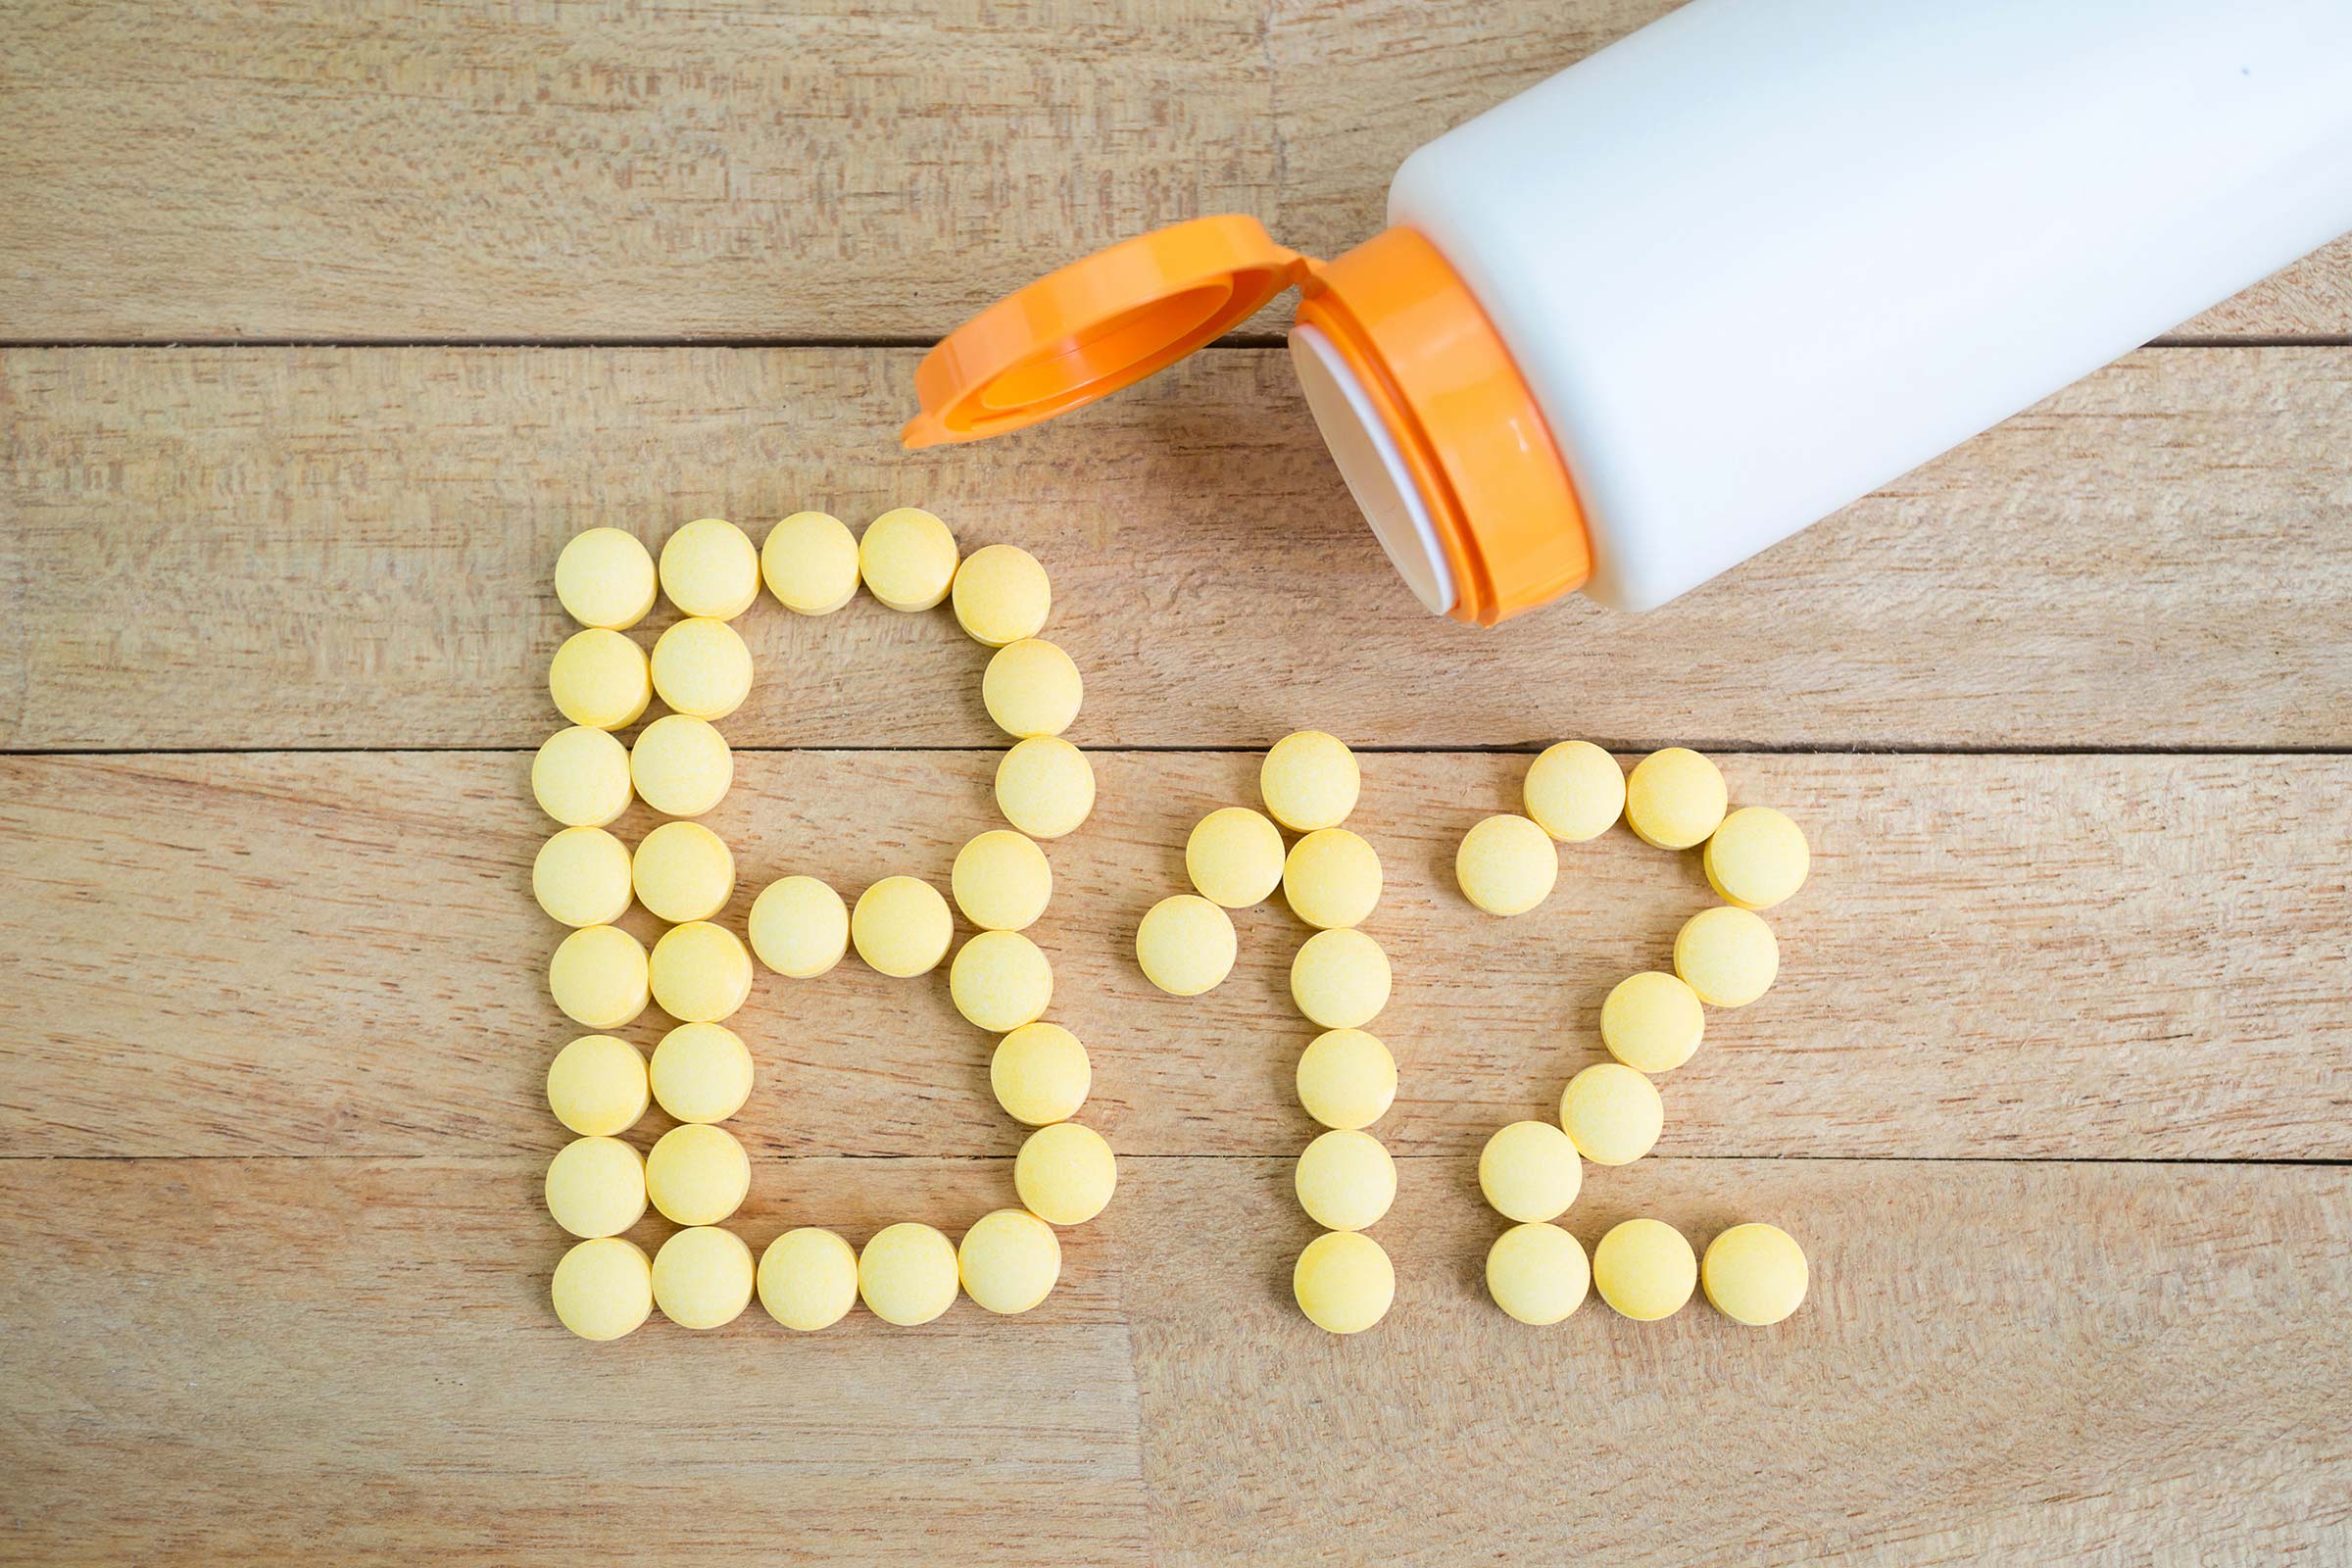 B12 Deficiency Is A Health Epidemic